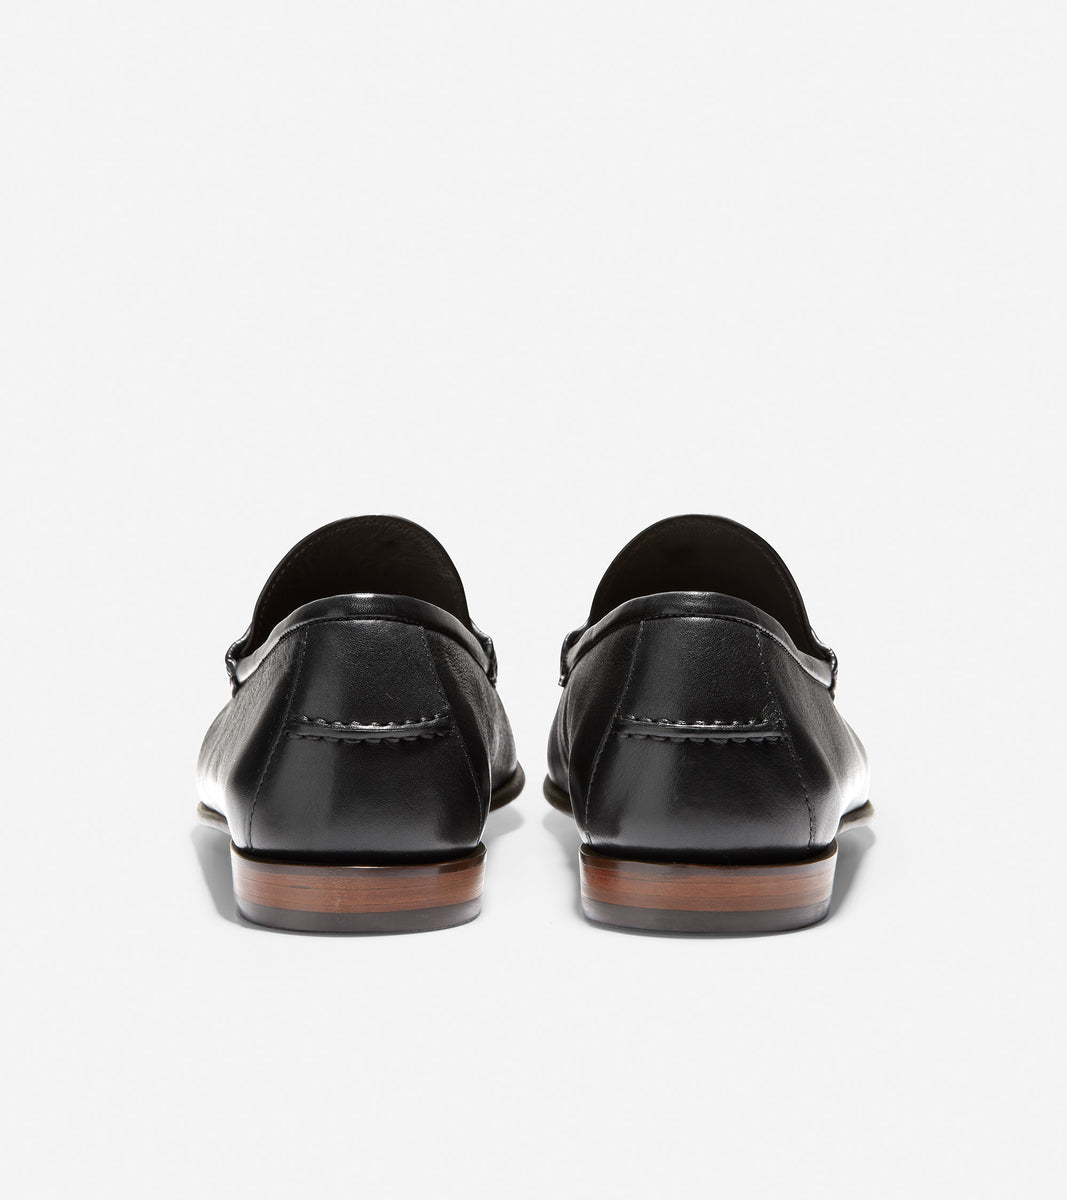 Hayes Penny Loafer